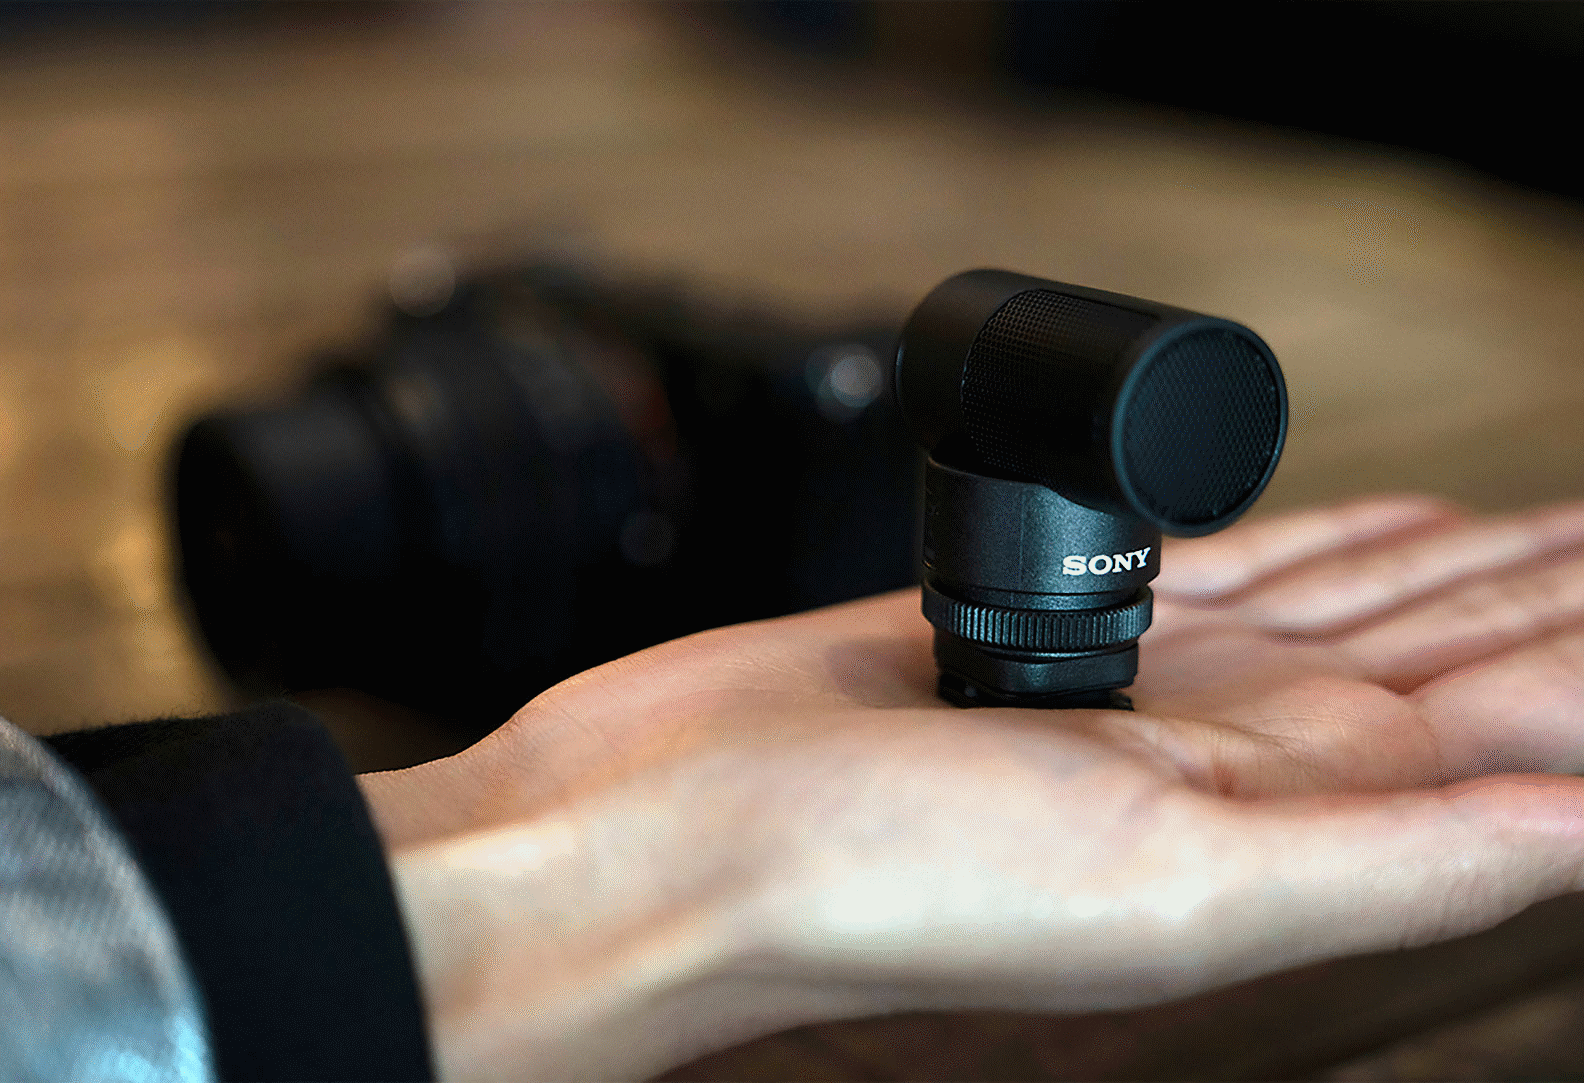 A photo of the ECM-G1 on the hand, compact enough to fit in one hand.